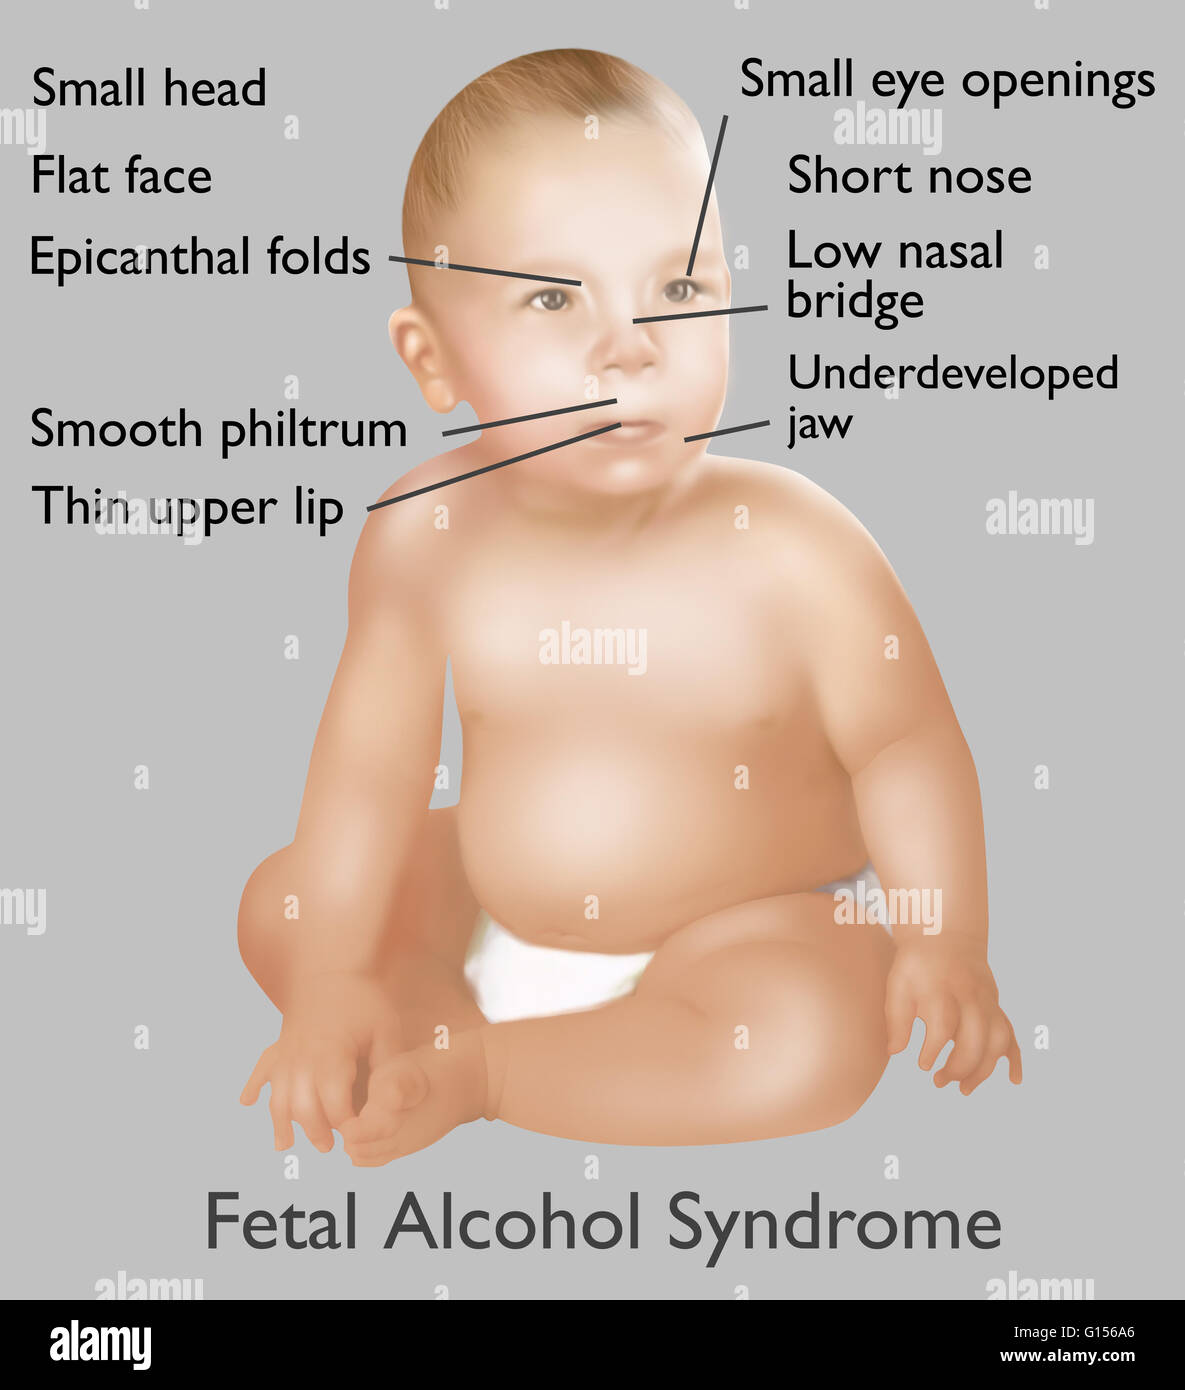 Illustration of baby with Fetal Alcohol Syndrome. Fetal Alcohol Syndrome or (FAS) is a condition in infants that is caused by alcohol consumption by the mother during time of pregnancy. Mental and physical defects such as a small head, flat face, epicanth Stock Photo